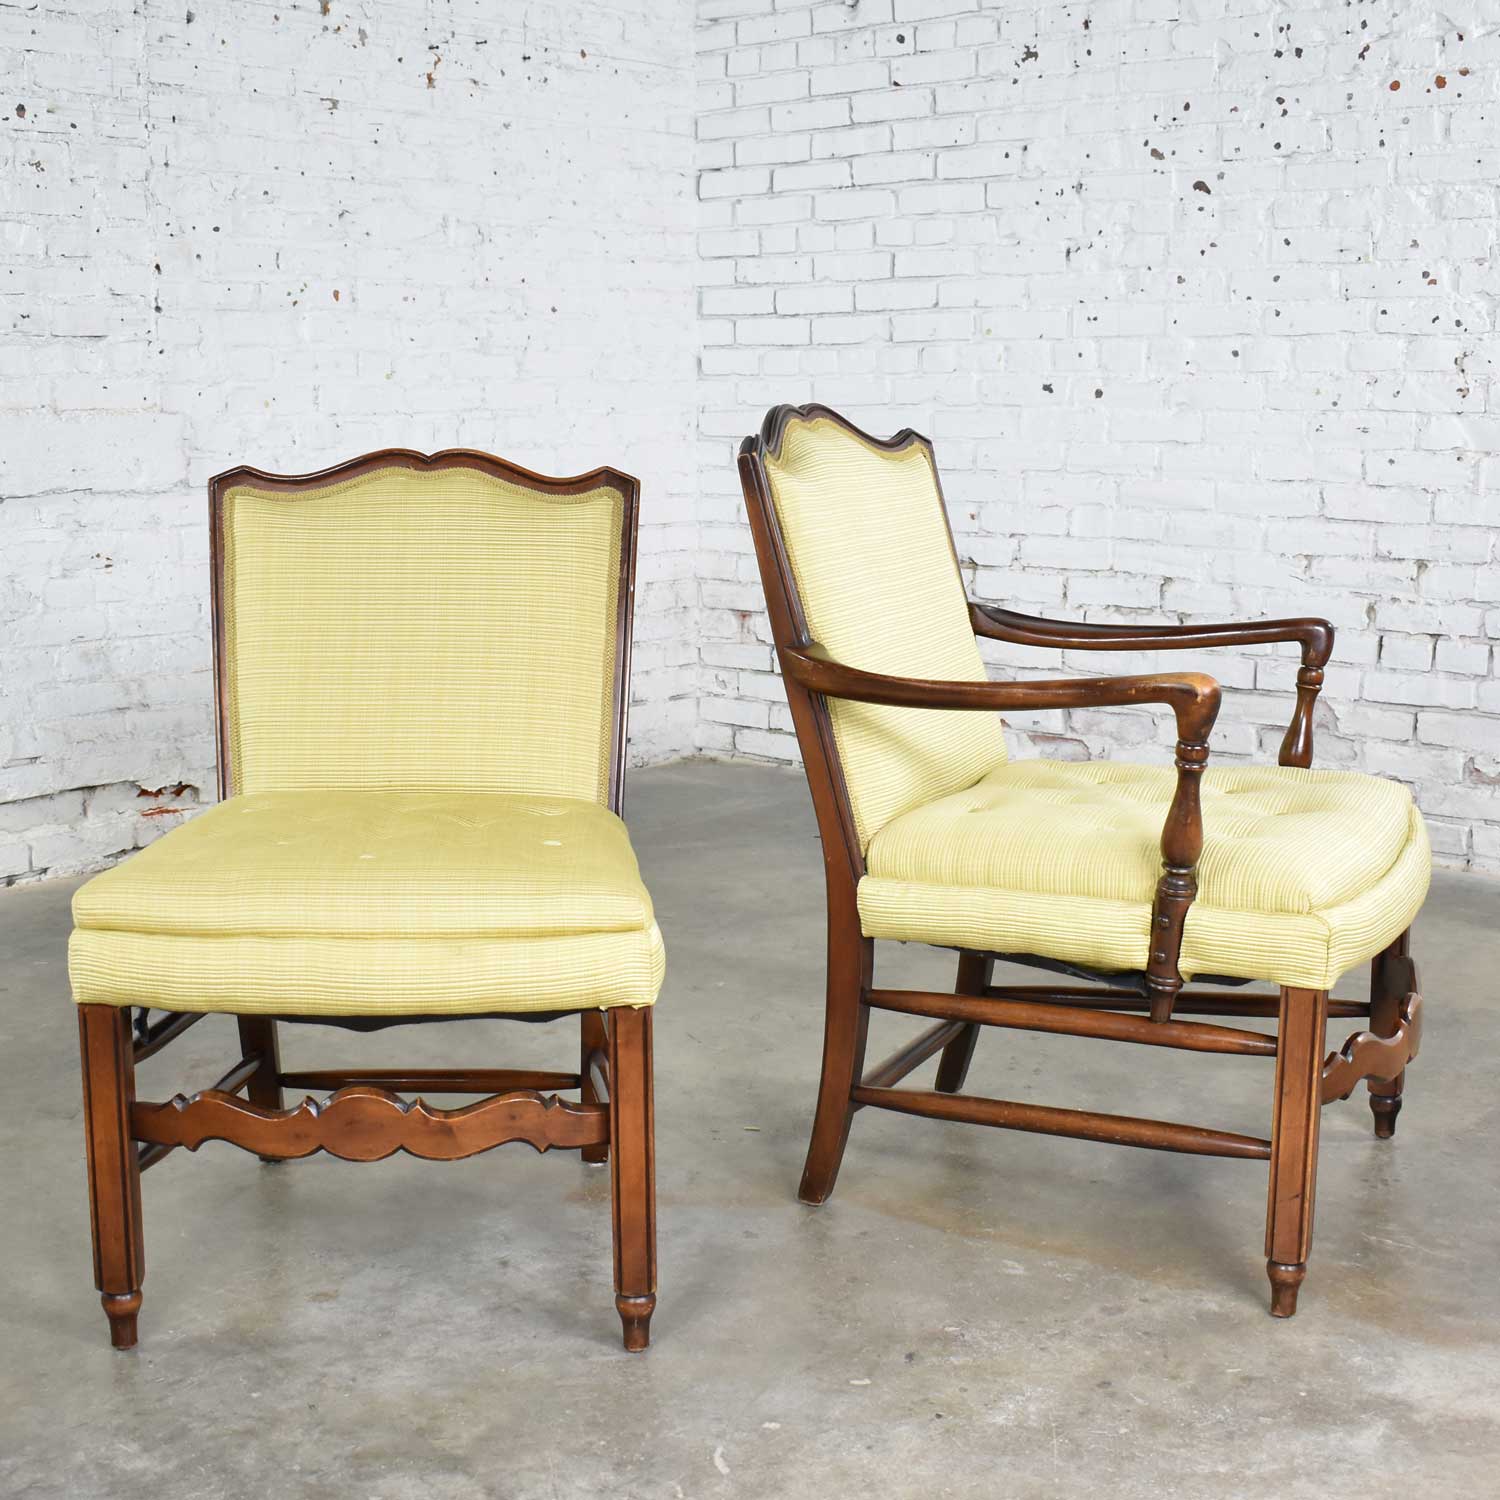 Pair of Georgian Revival His and Hers Accent Chairs in Golden Yellow